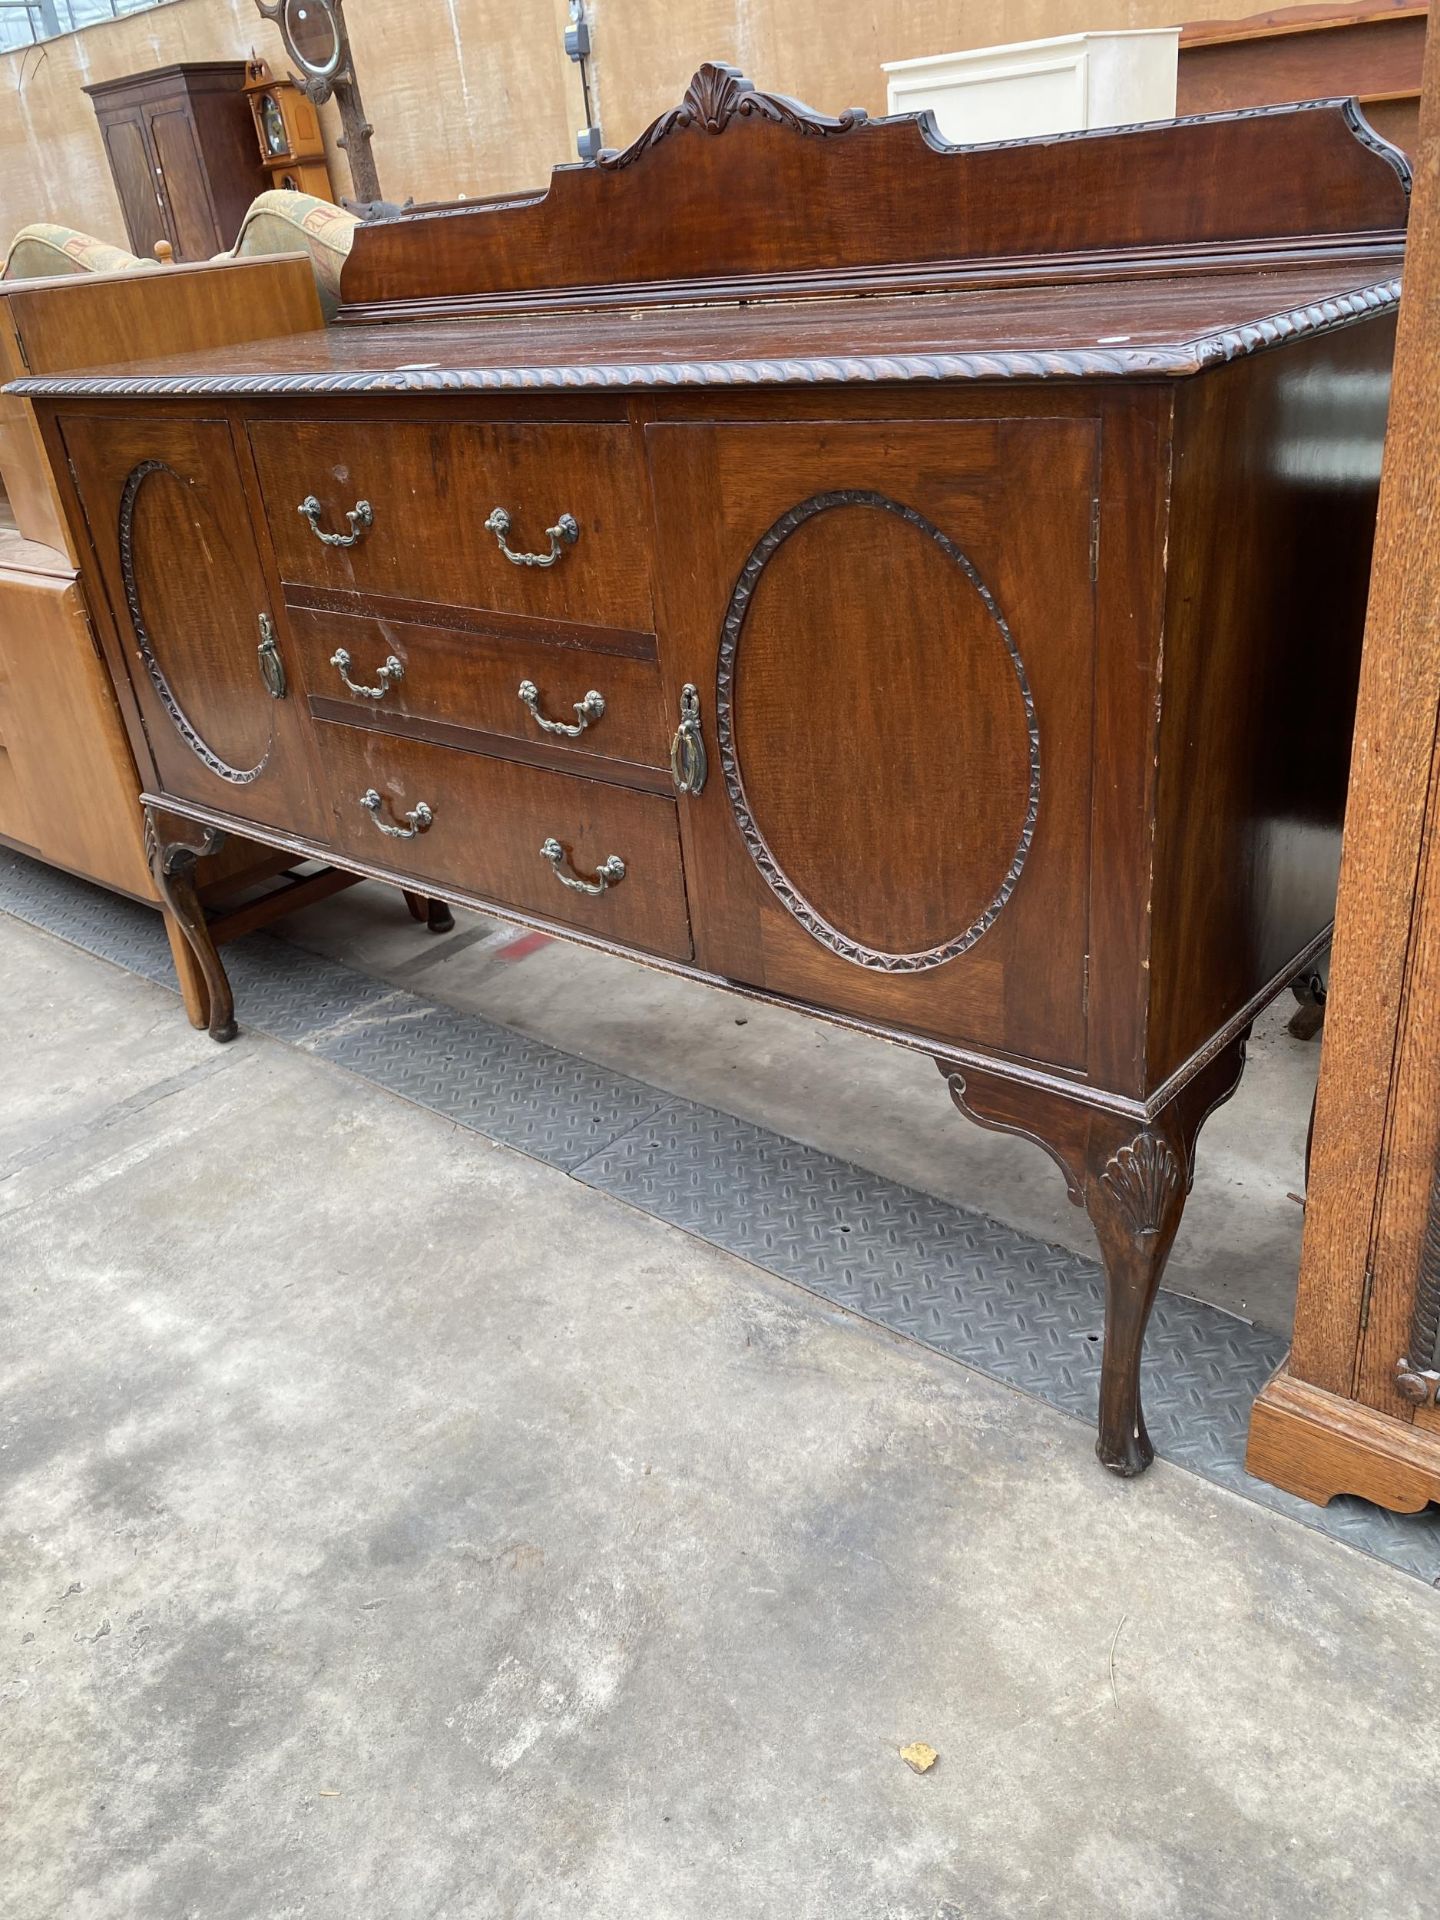 AN EARLY 20TH CENTURY MAHOGANY SIDEBOARD WITH ROPE EDGE ON CABRIOLE LEGS, 60" WIDE - Image 2 of 4